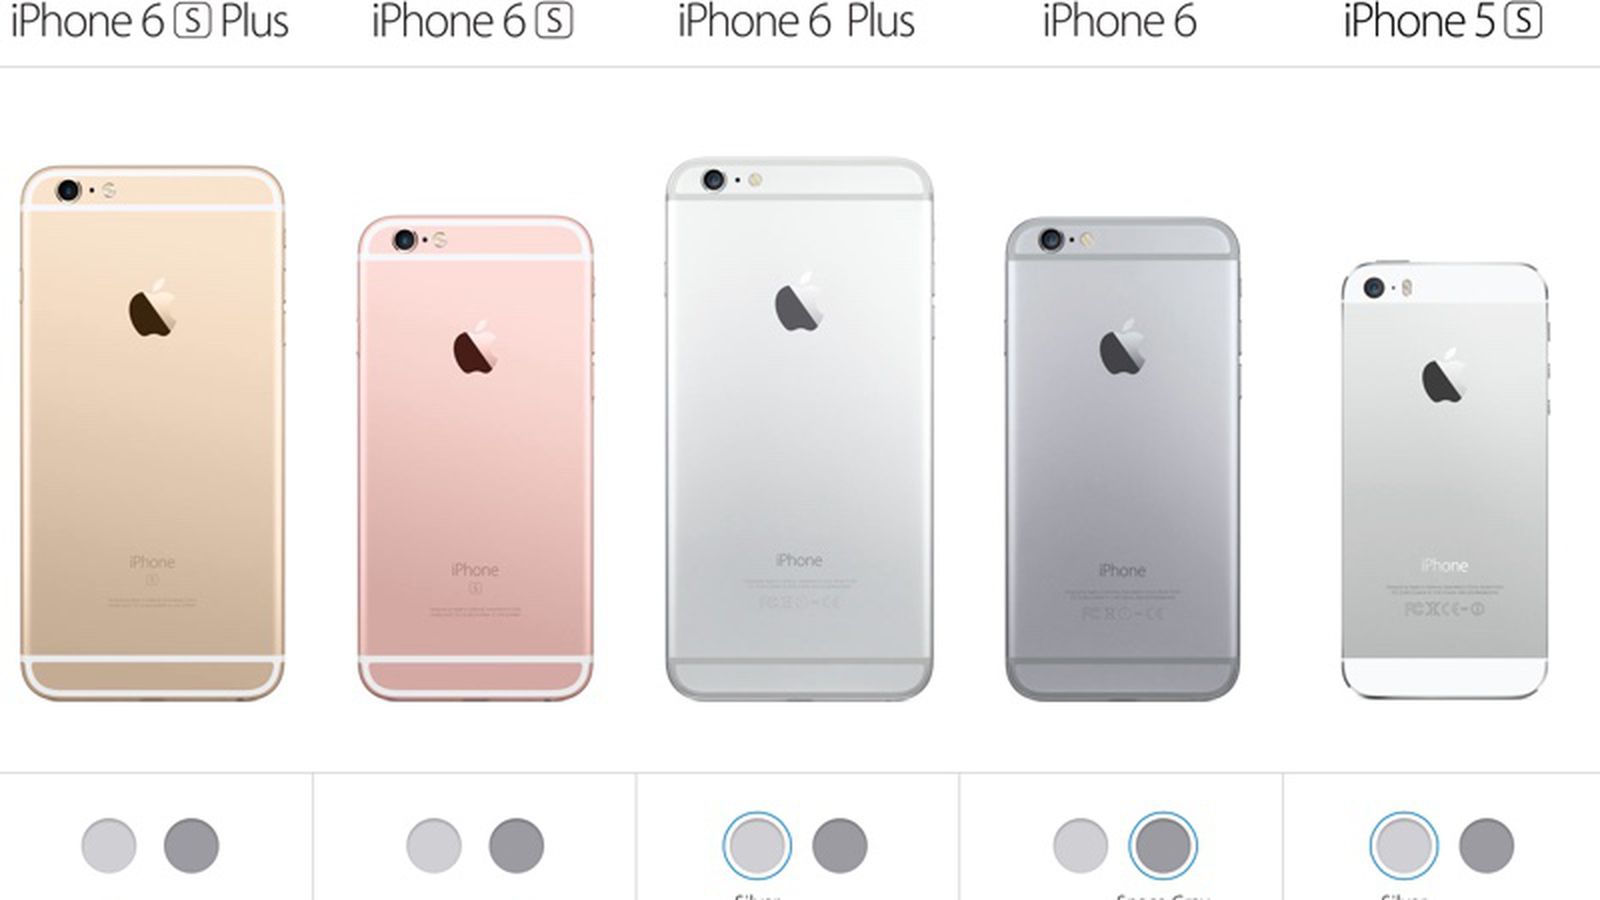 Apple Discontinues Options Older iPhone 6, 6 Plus, and 5s - MacRumors